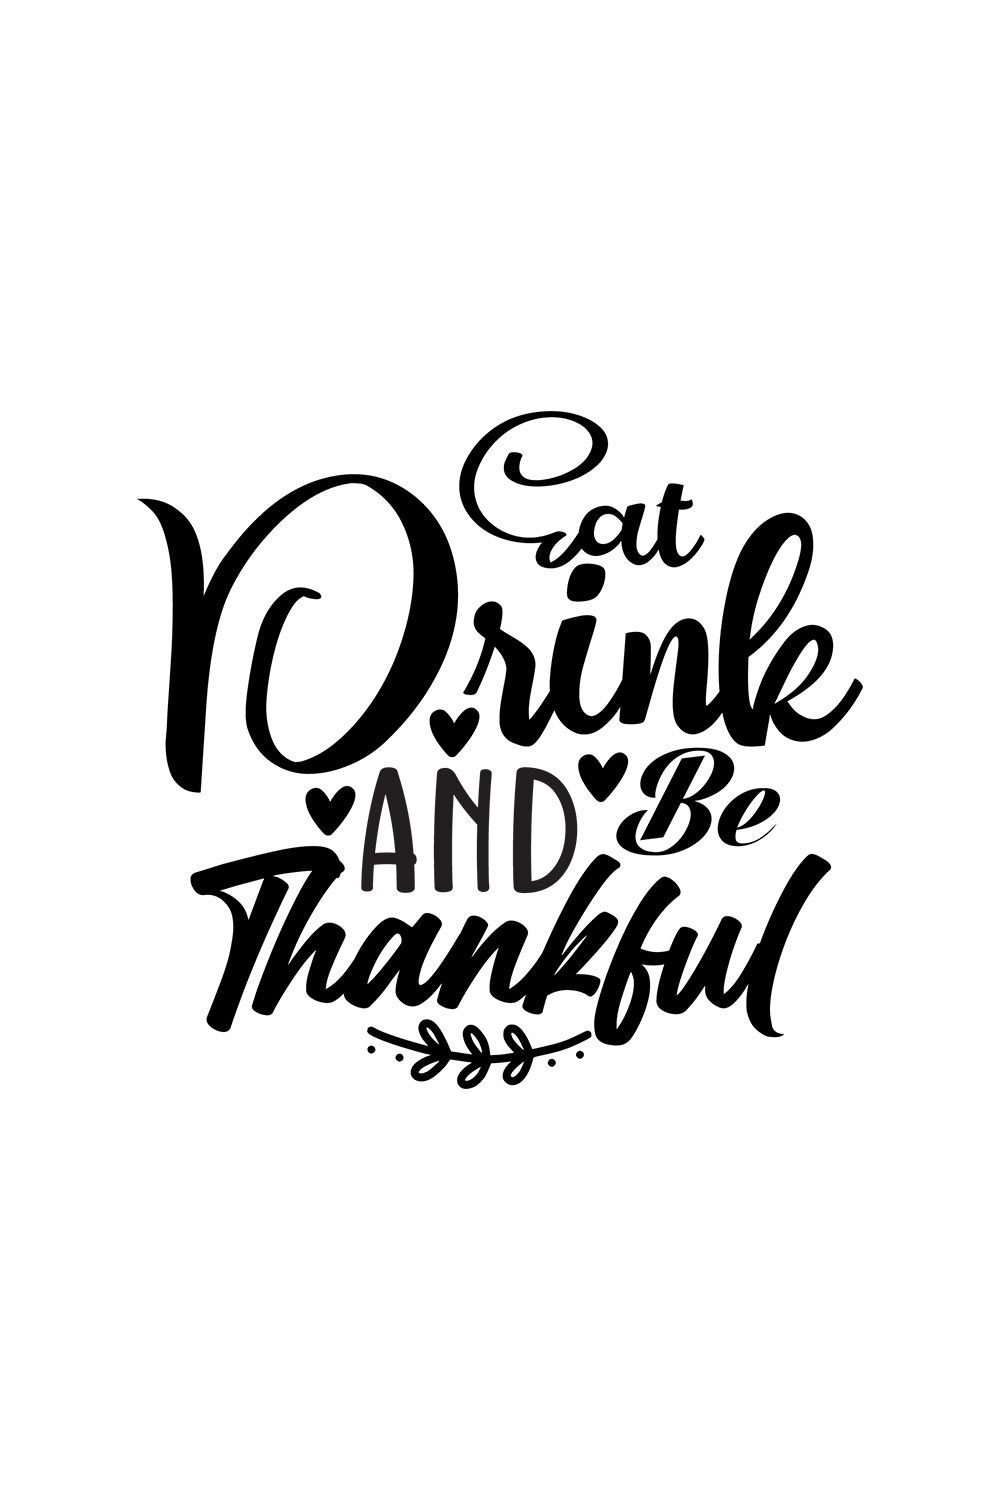 Image with wonderful black lettering for Eat Drink And Be Thankful prints.